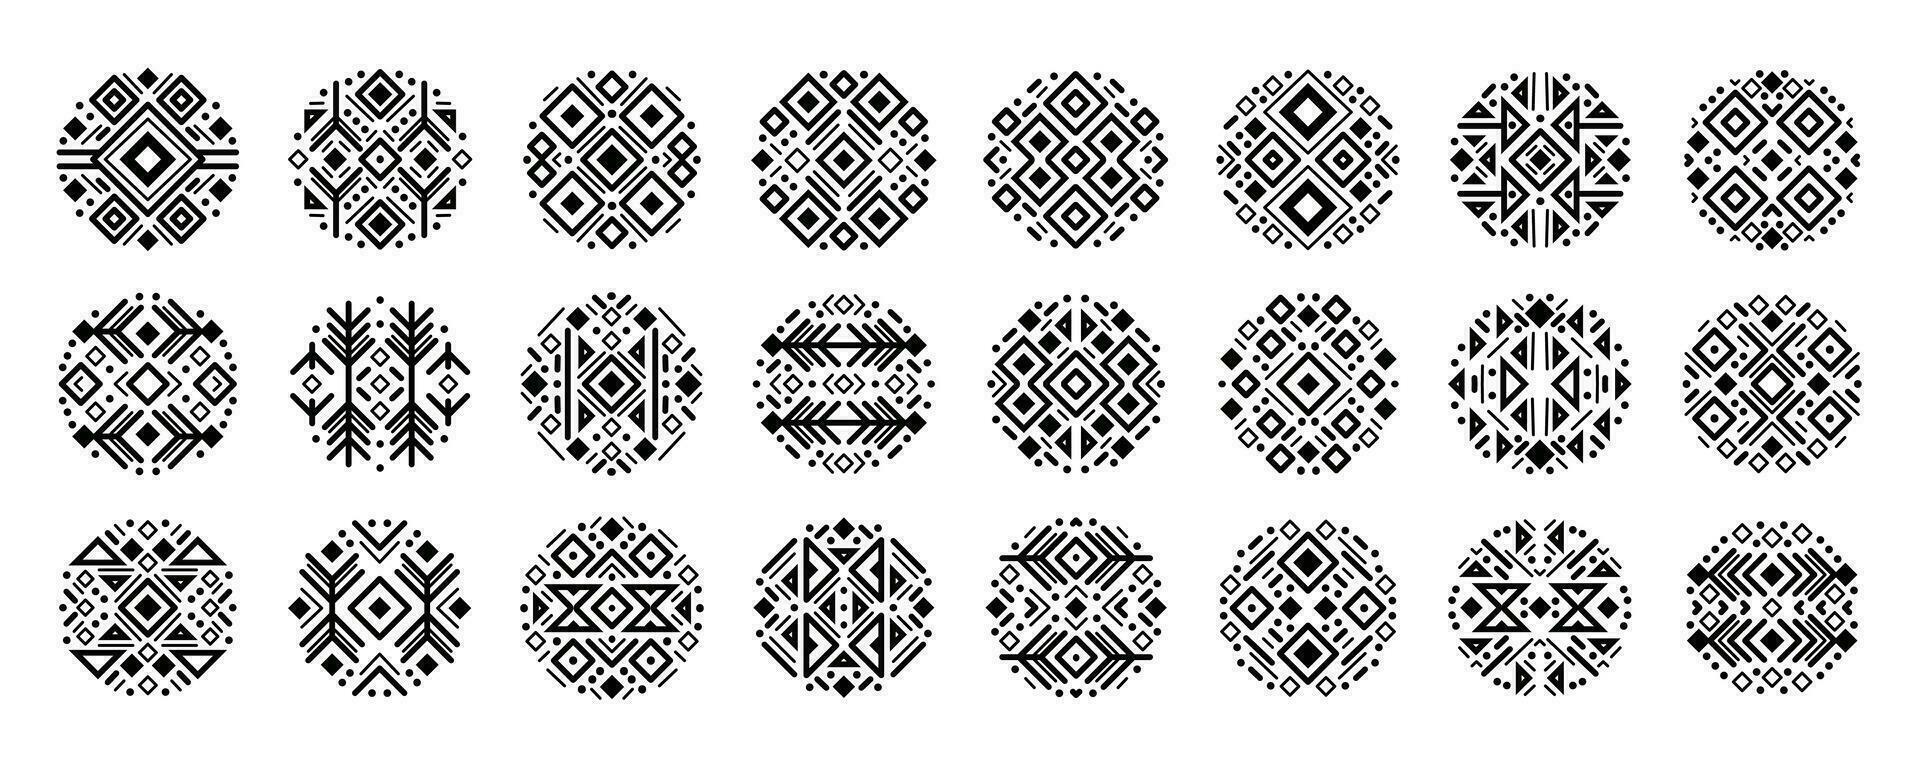 Black and white set of tribal shapes, geometric aztec circles vector